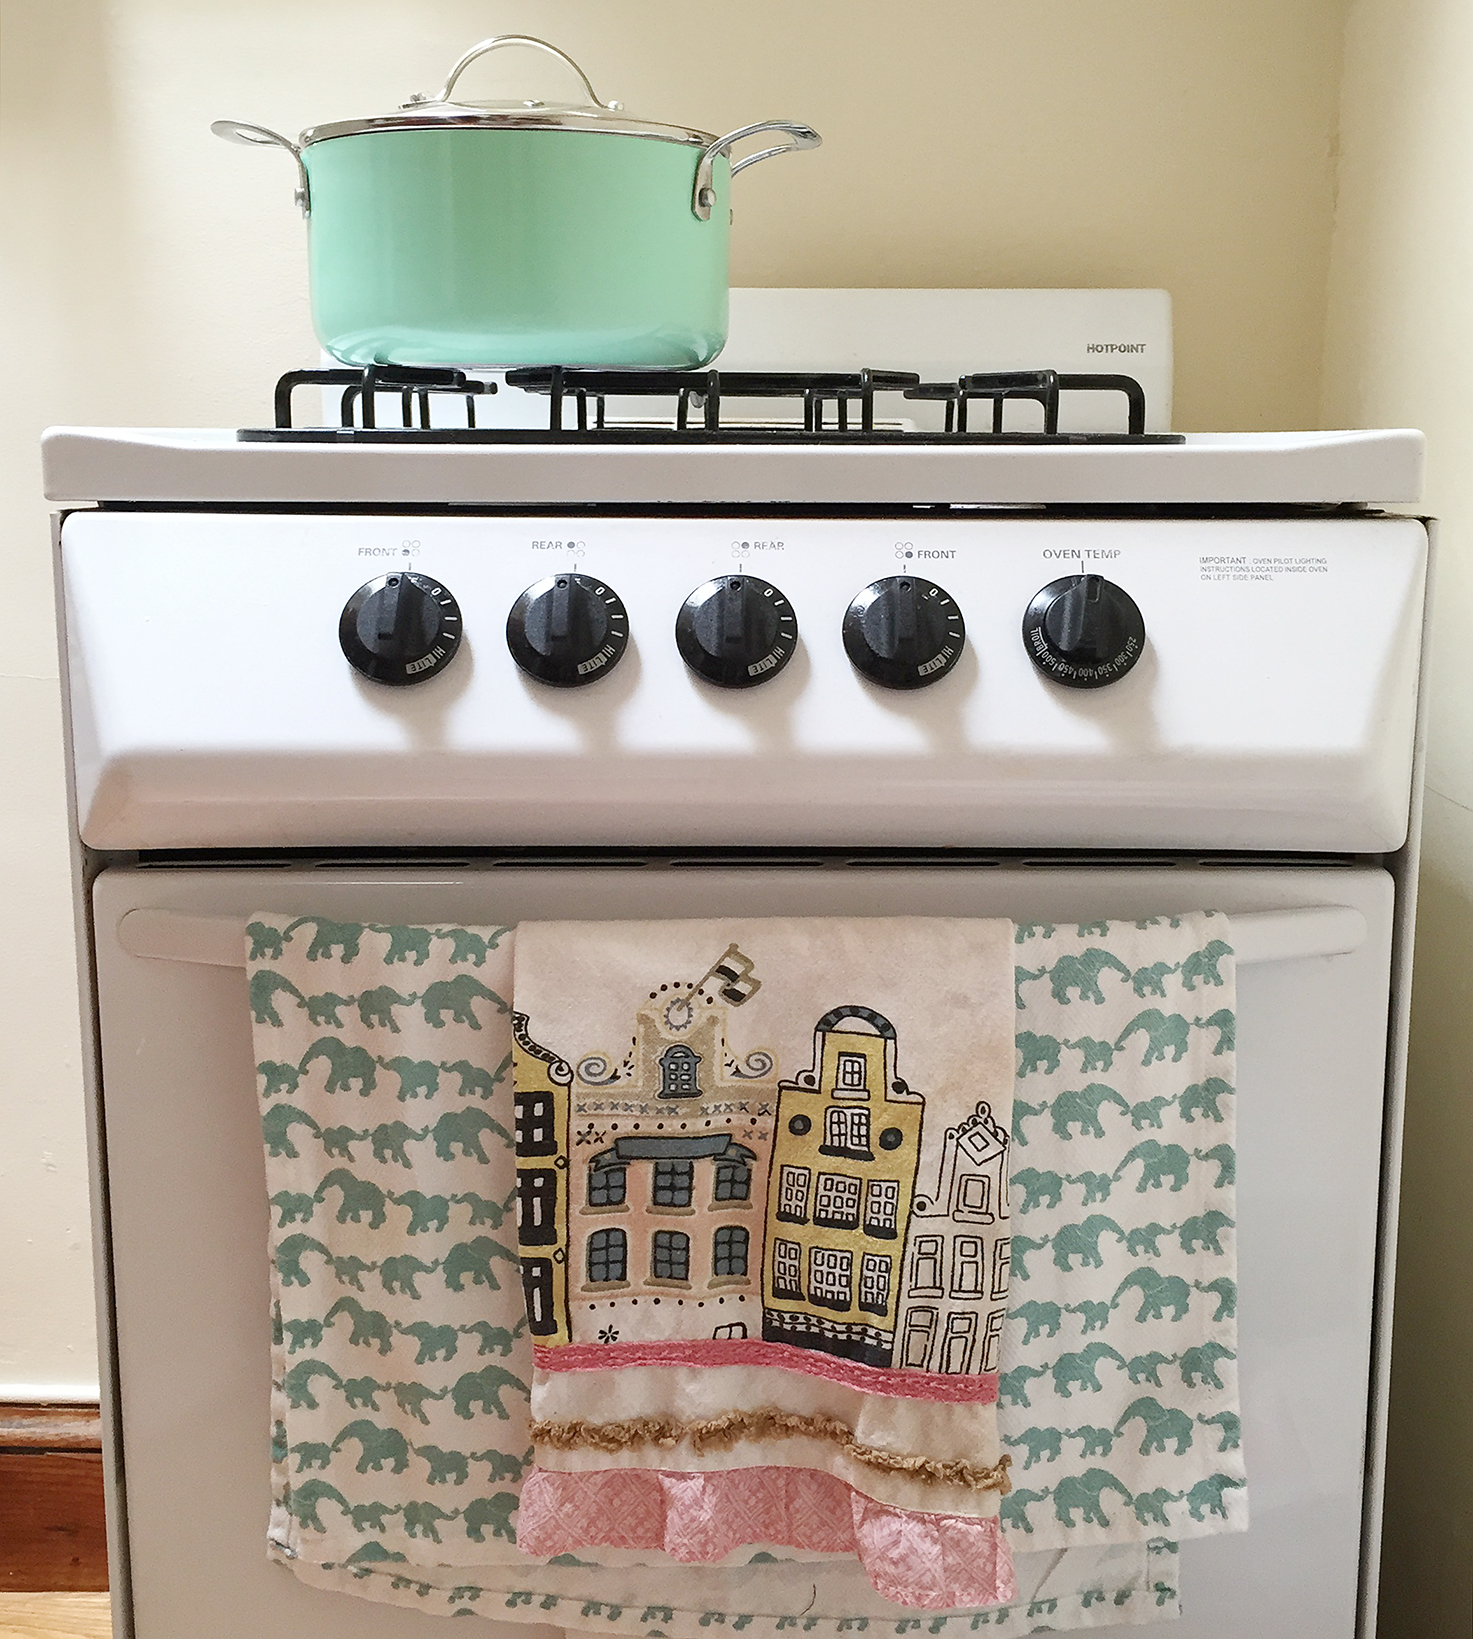 Small stove with turquoise pot and elephant print dish towels